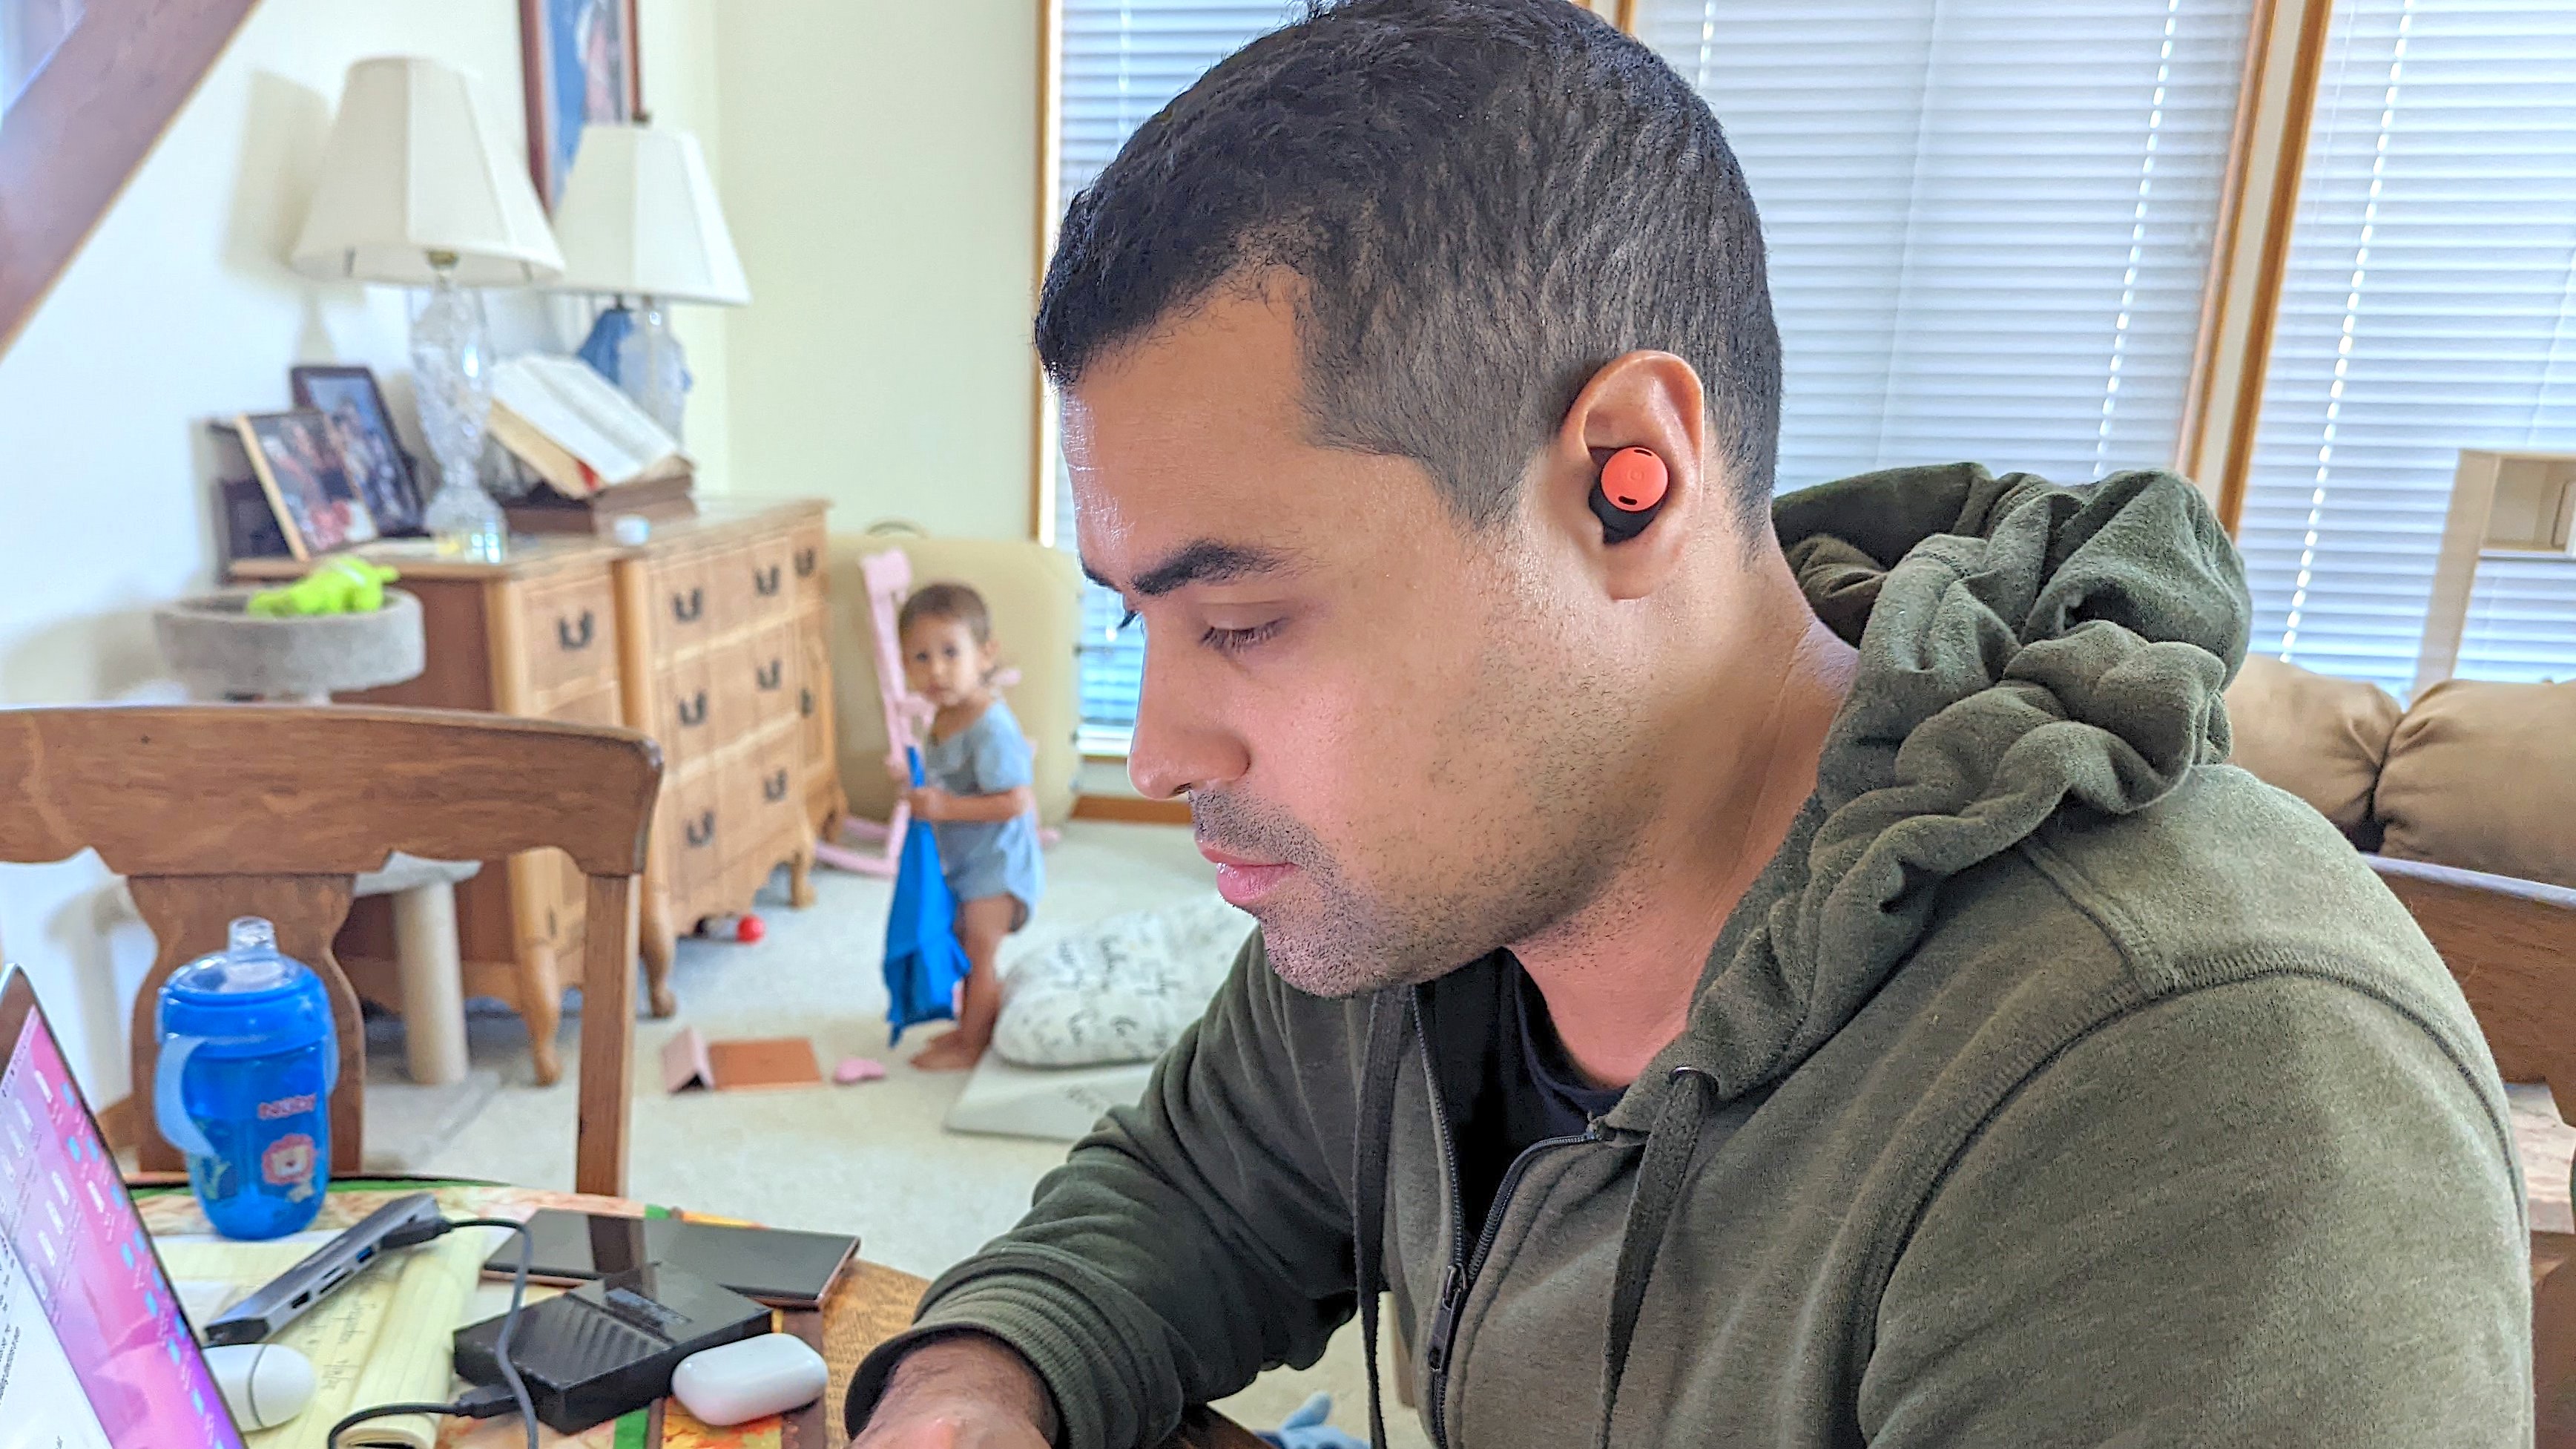 Our reviewer testing the Google Pixel Buds Pro's active noise cancellation in his child's playroom